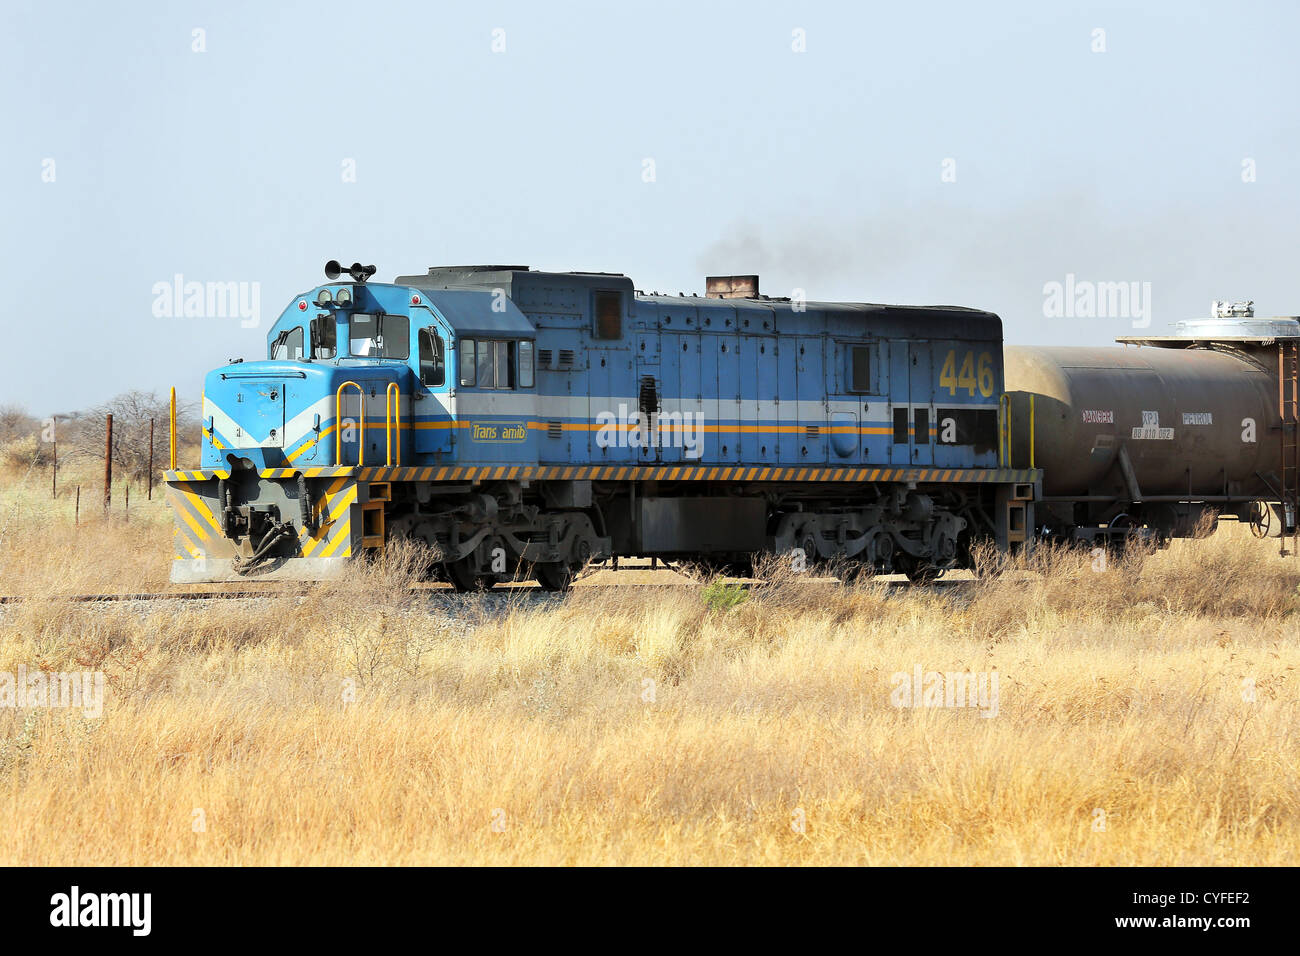 Diesel locomotive, freight train in Namibia Stock Photo